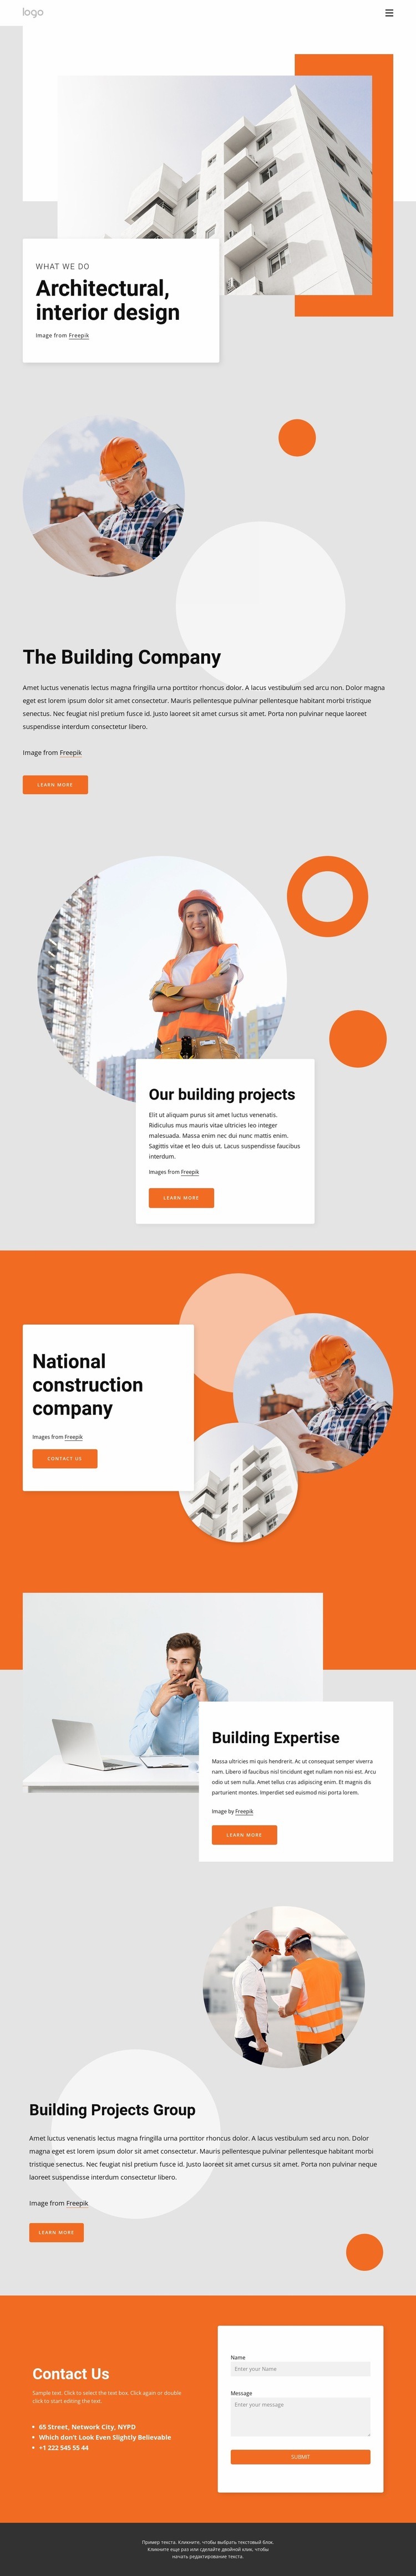 Architects in London Web Page Design